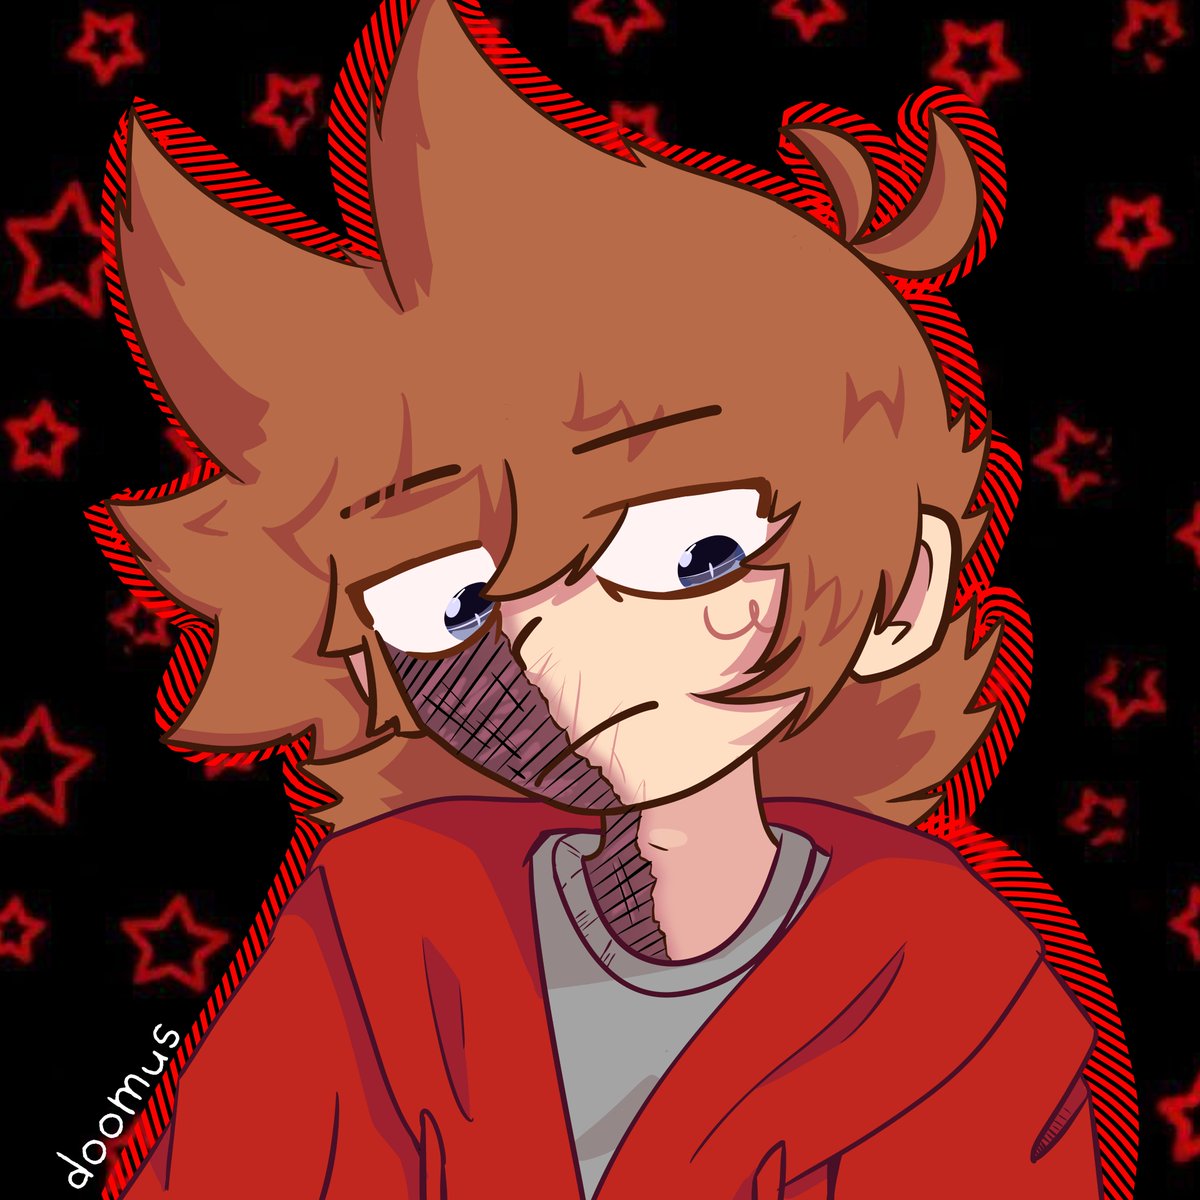 ITS FINALLY DONE! TOOK TWO DAYS BUT IM SO PROUD OF IT!!
i had to post it before i decided it wasnt done yet for the 50th time..

#tord #eddsworldfanart #tordeddsworld #tordfanart #eddsworld #y2k #tordew #ewtord #ewtordfanart #eddsworldtord